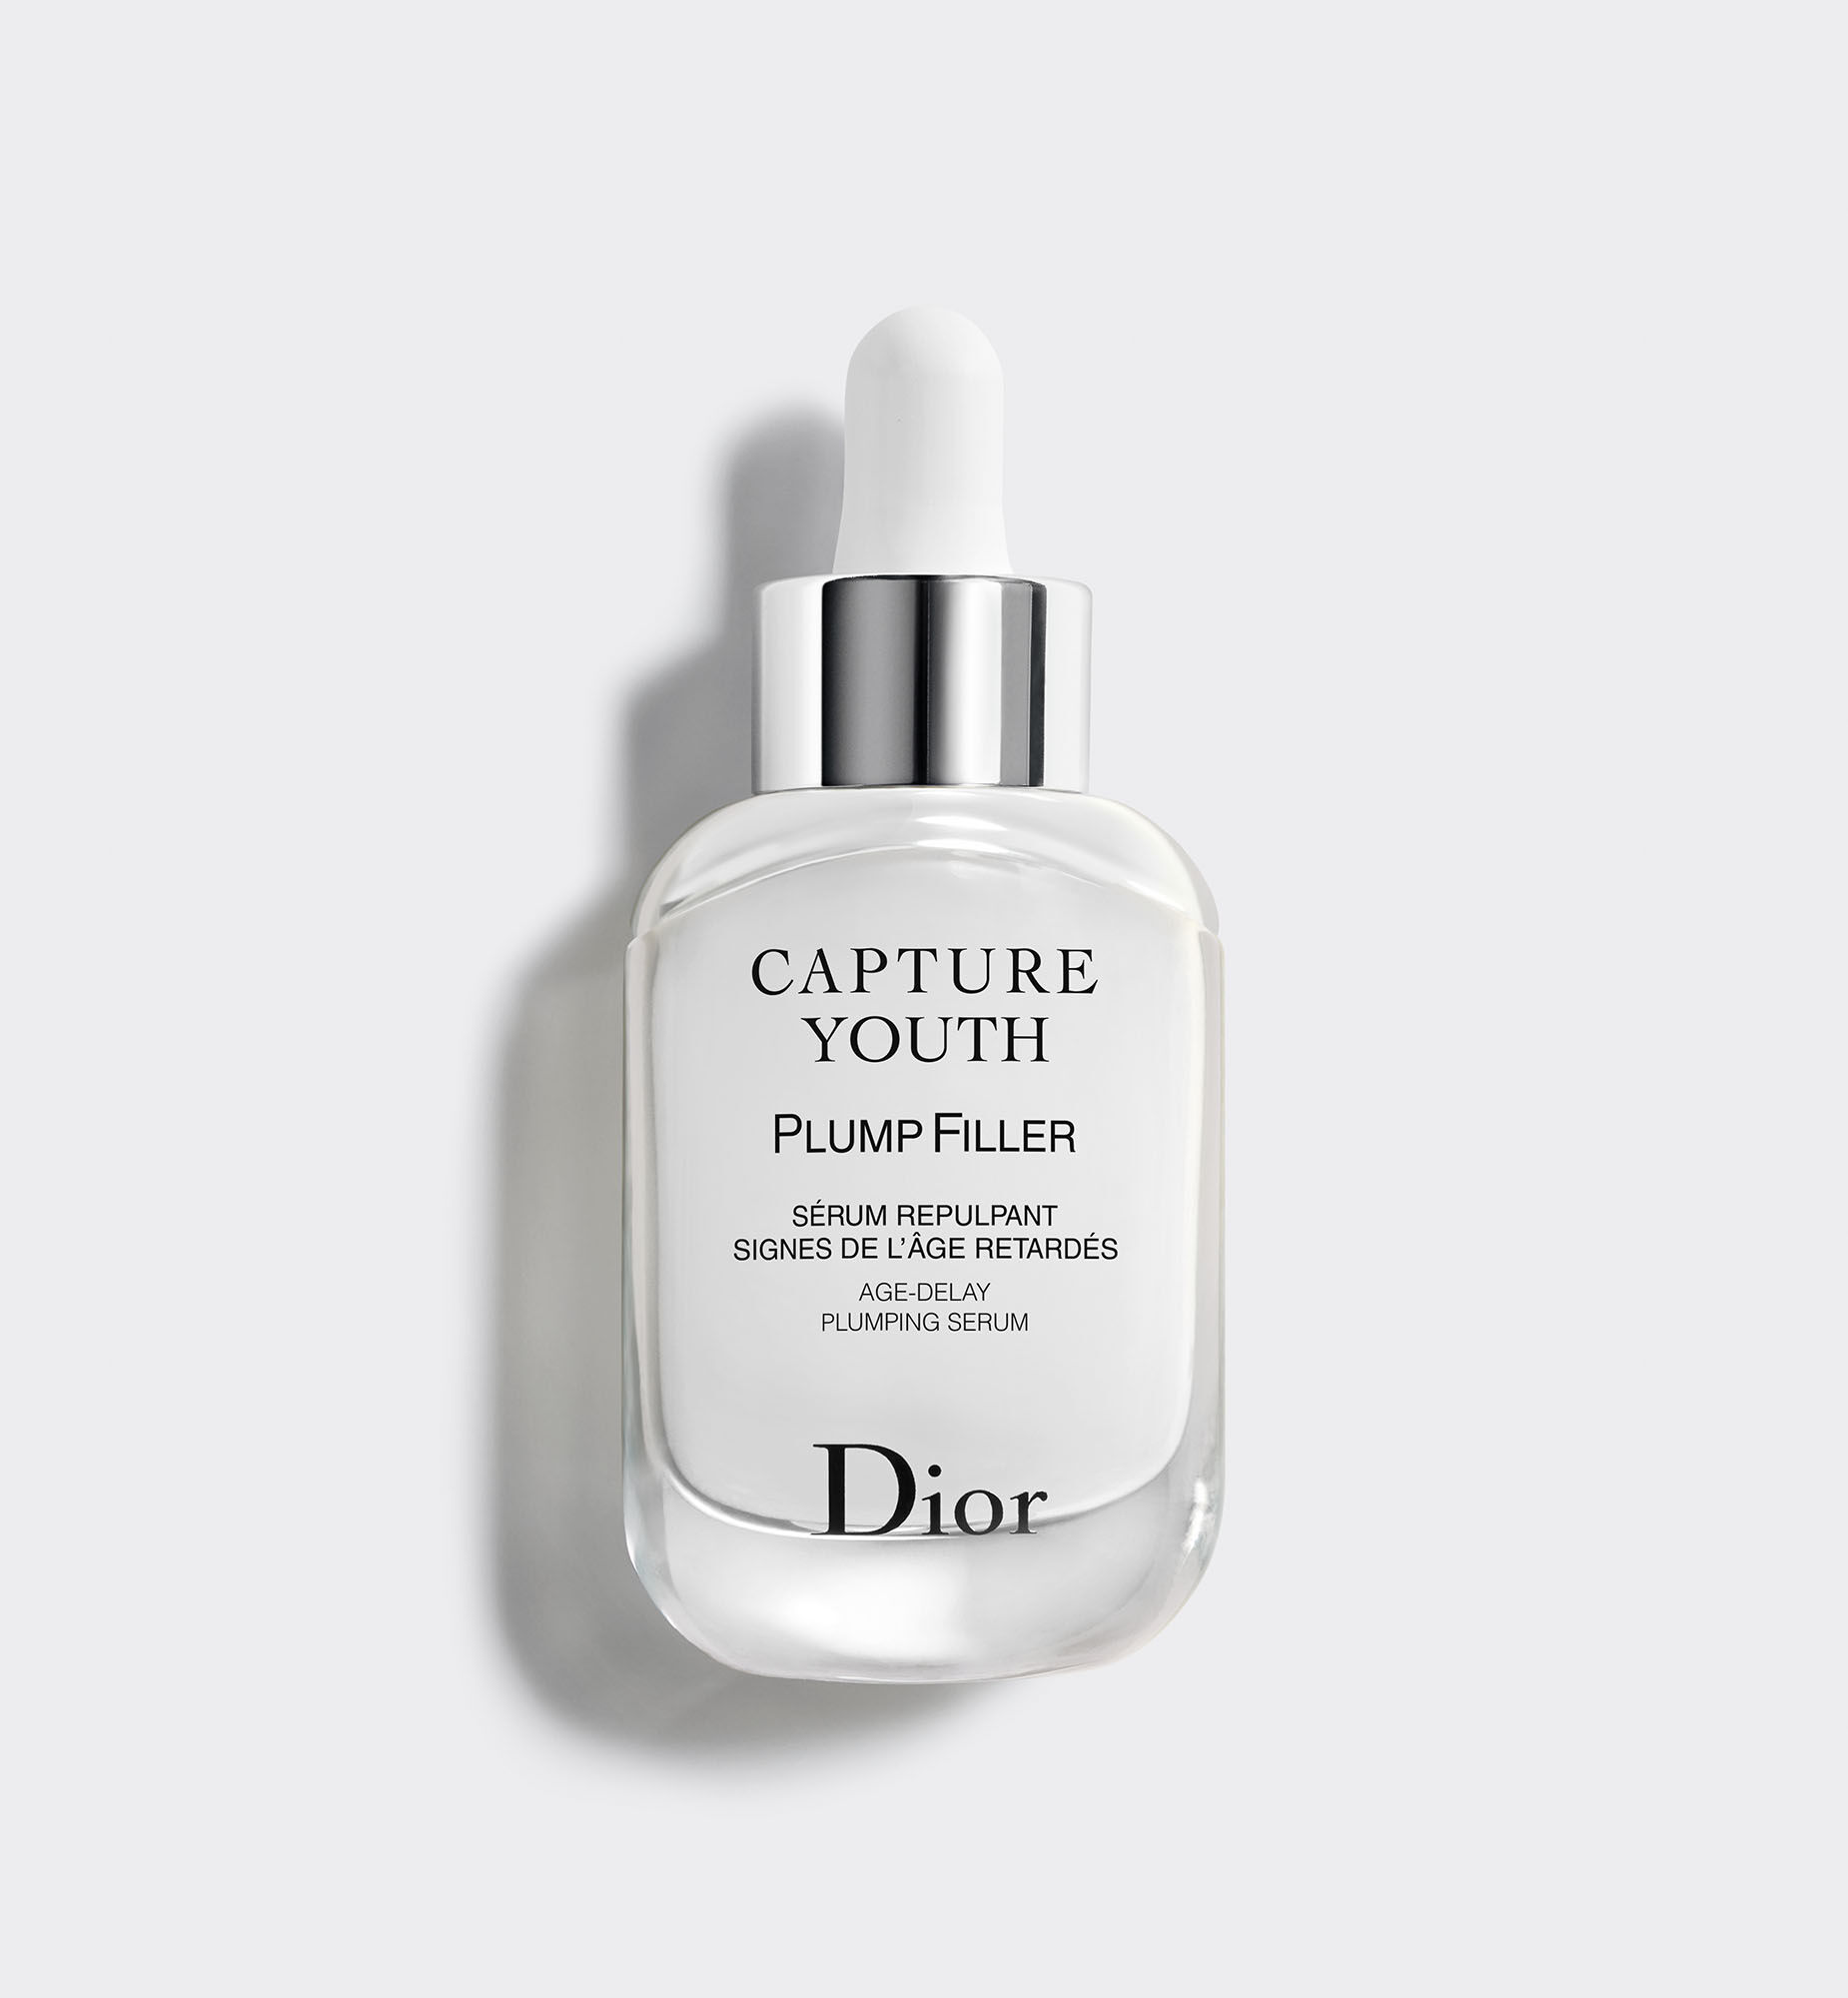 CAPTURE YOUTH SERUM GLOW BOOSTER  DIOR AE